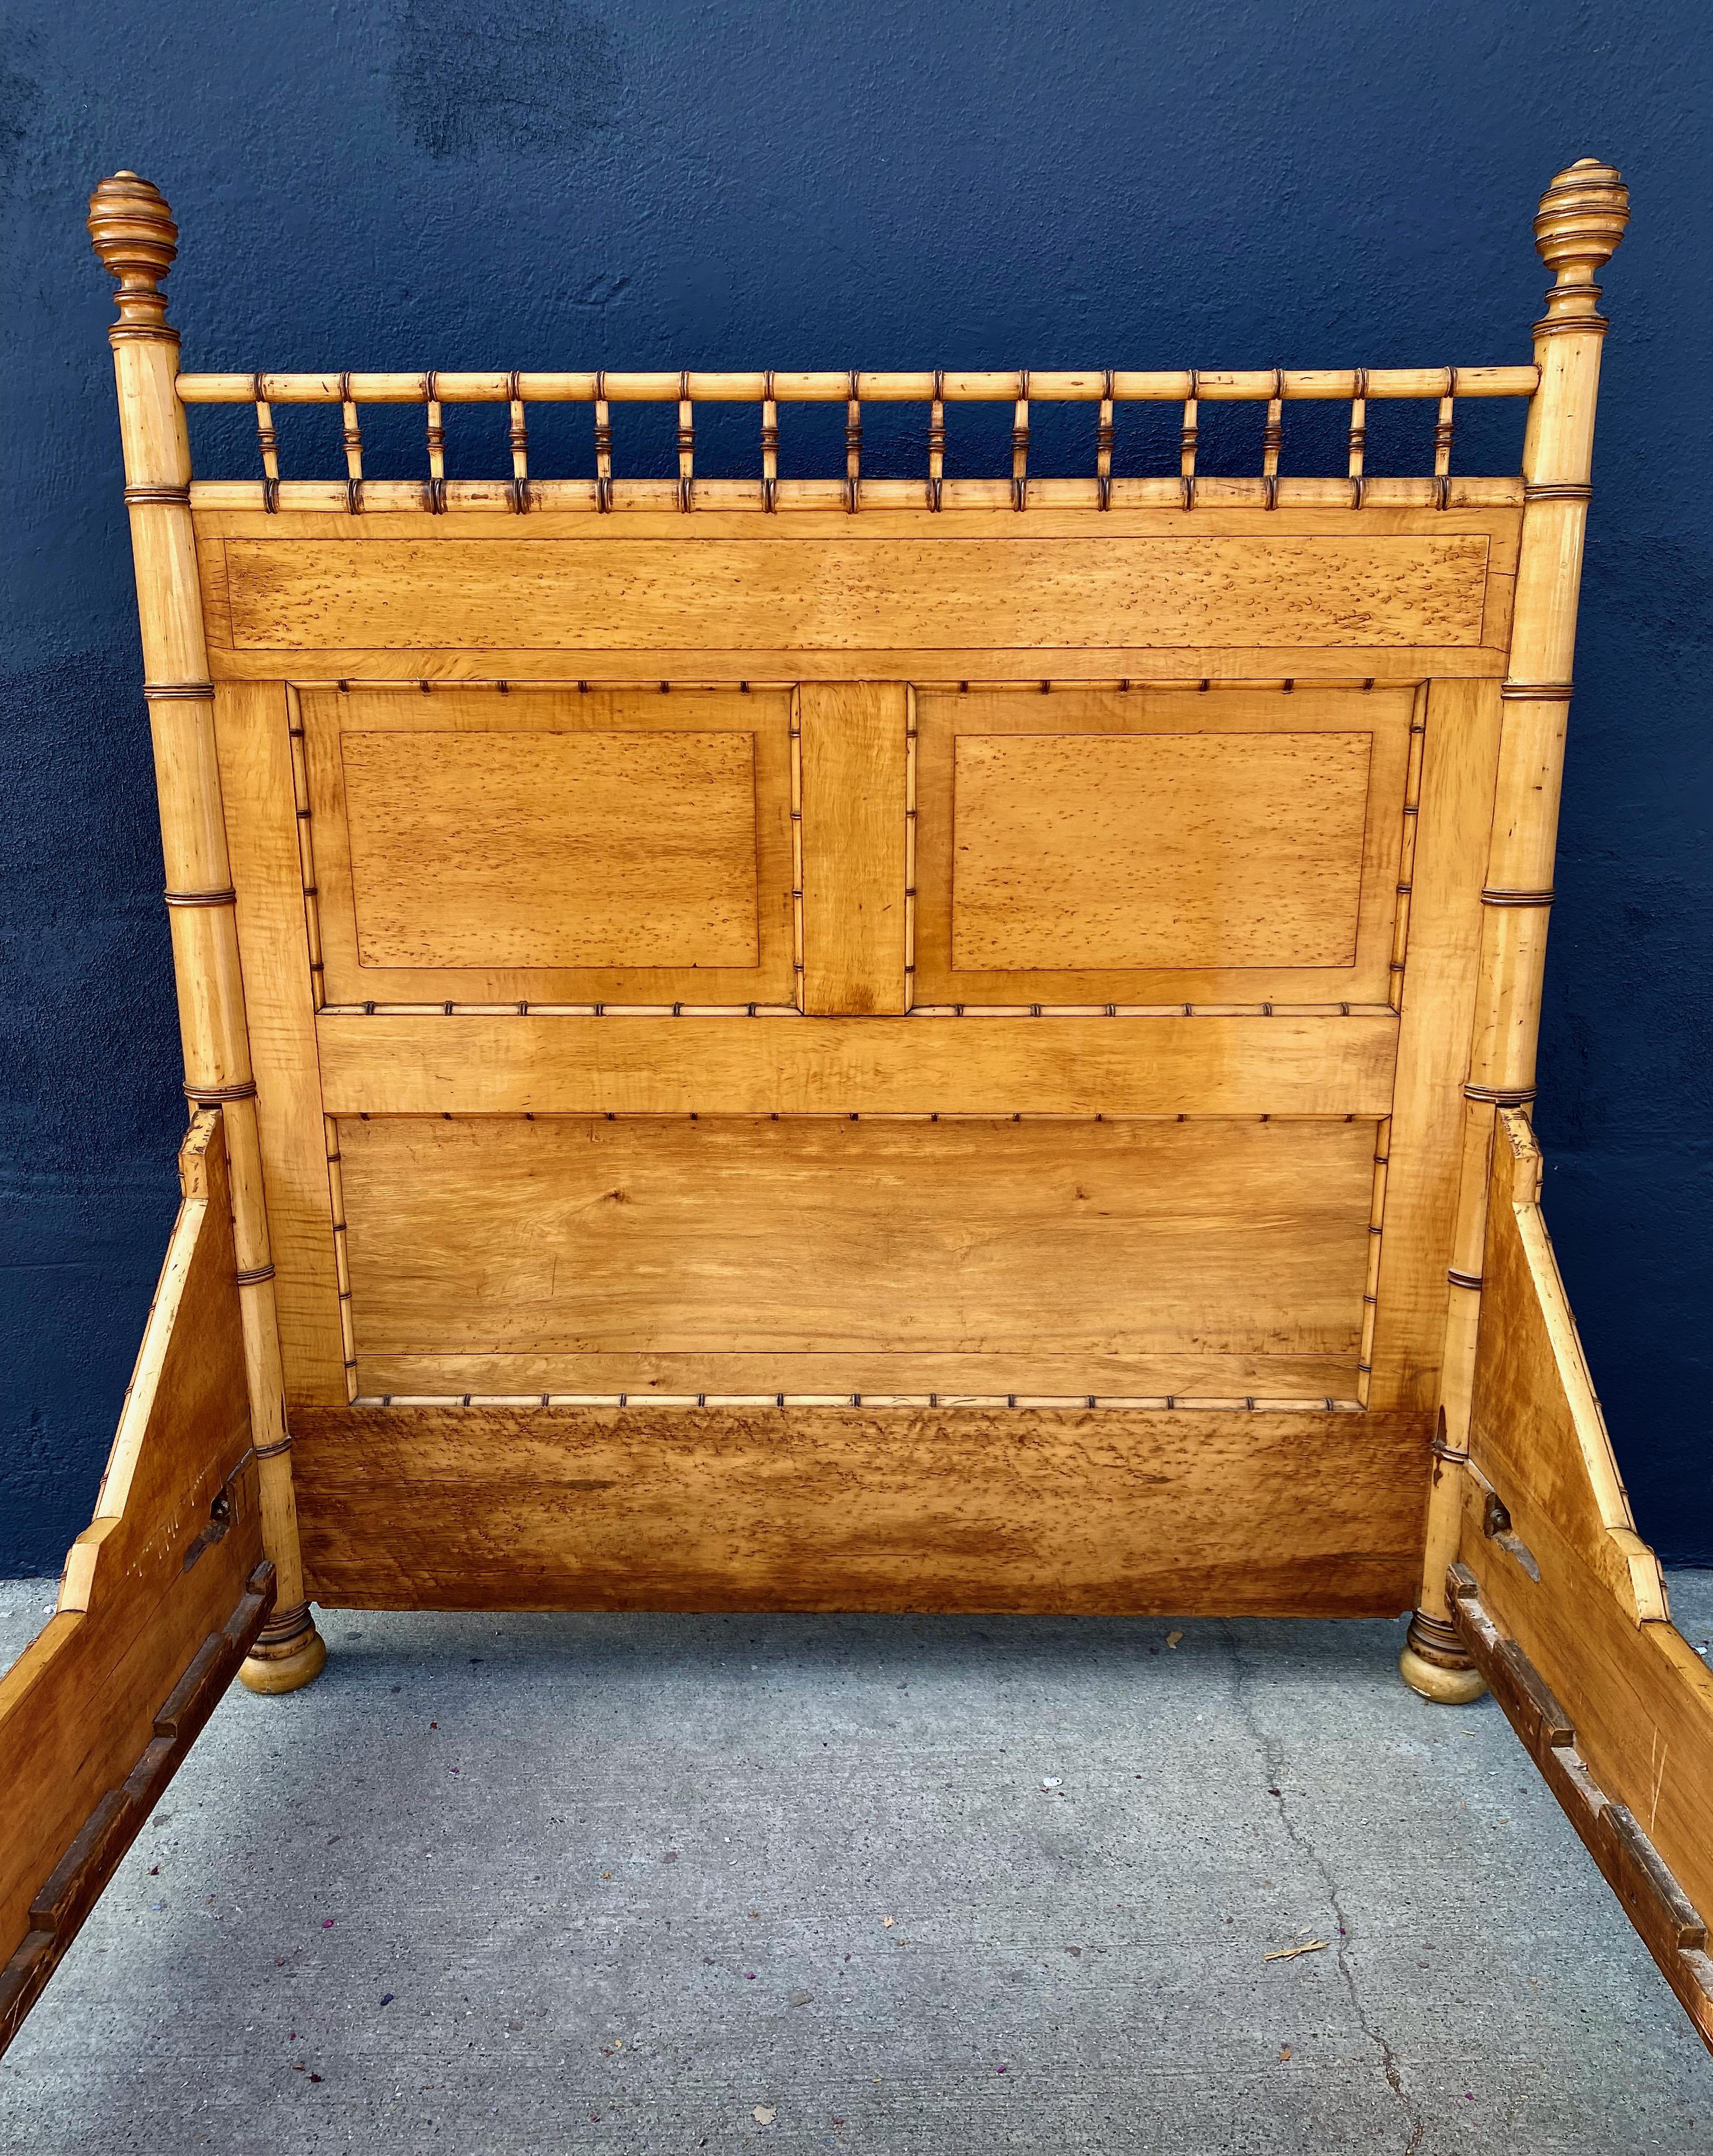 This is a very good example of an R.J. Horner & Co. Aesthetic Movement Faux Bamboo bed. The bed is beautifully designed utilizing various type of maple--birds-eye maple, curly maple, tiger maple and plain maple. These finely grained maples are very